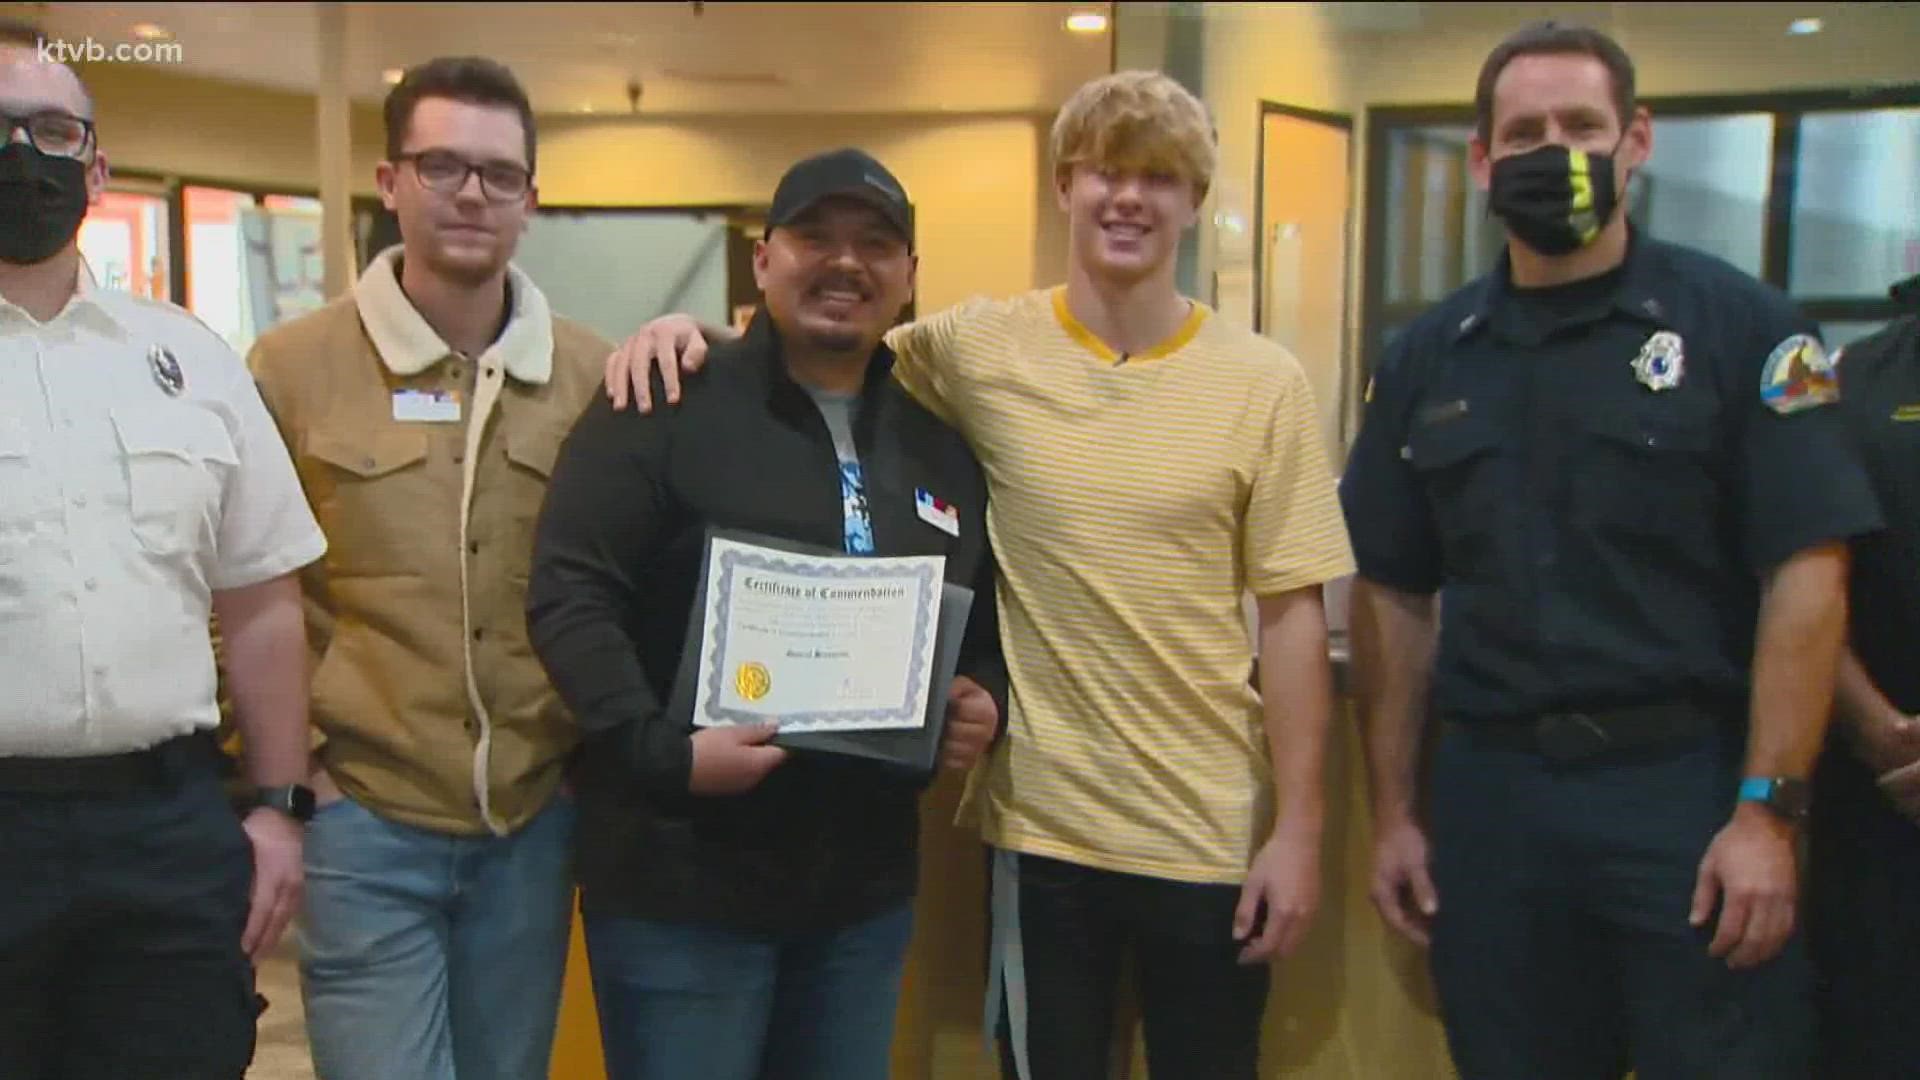 Travis Johnston went into cardiac arrest at the gym, and Gabriel Hernandez kept his heart beating until first responders arrived.